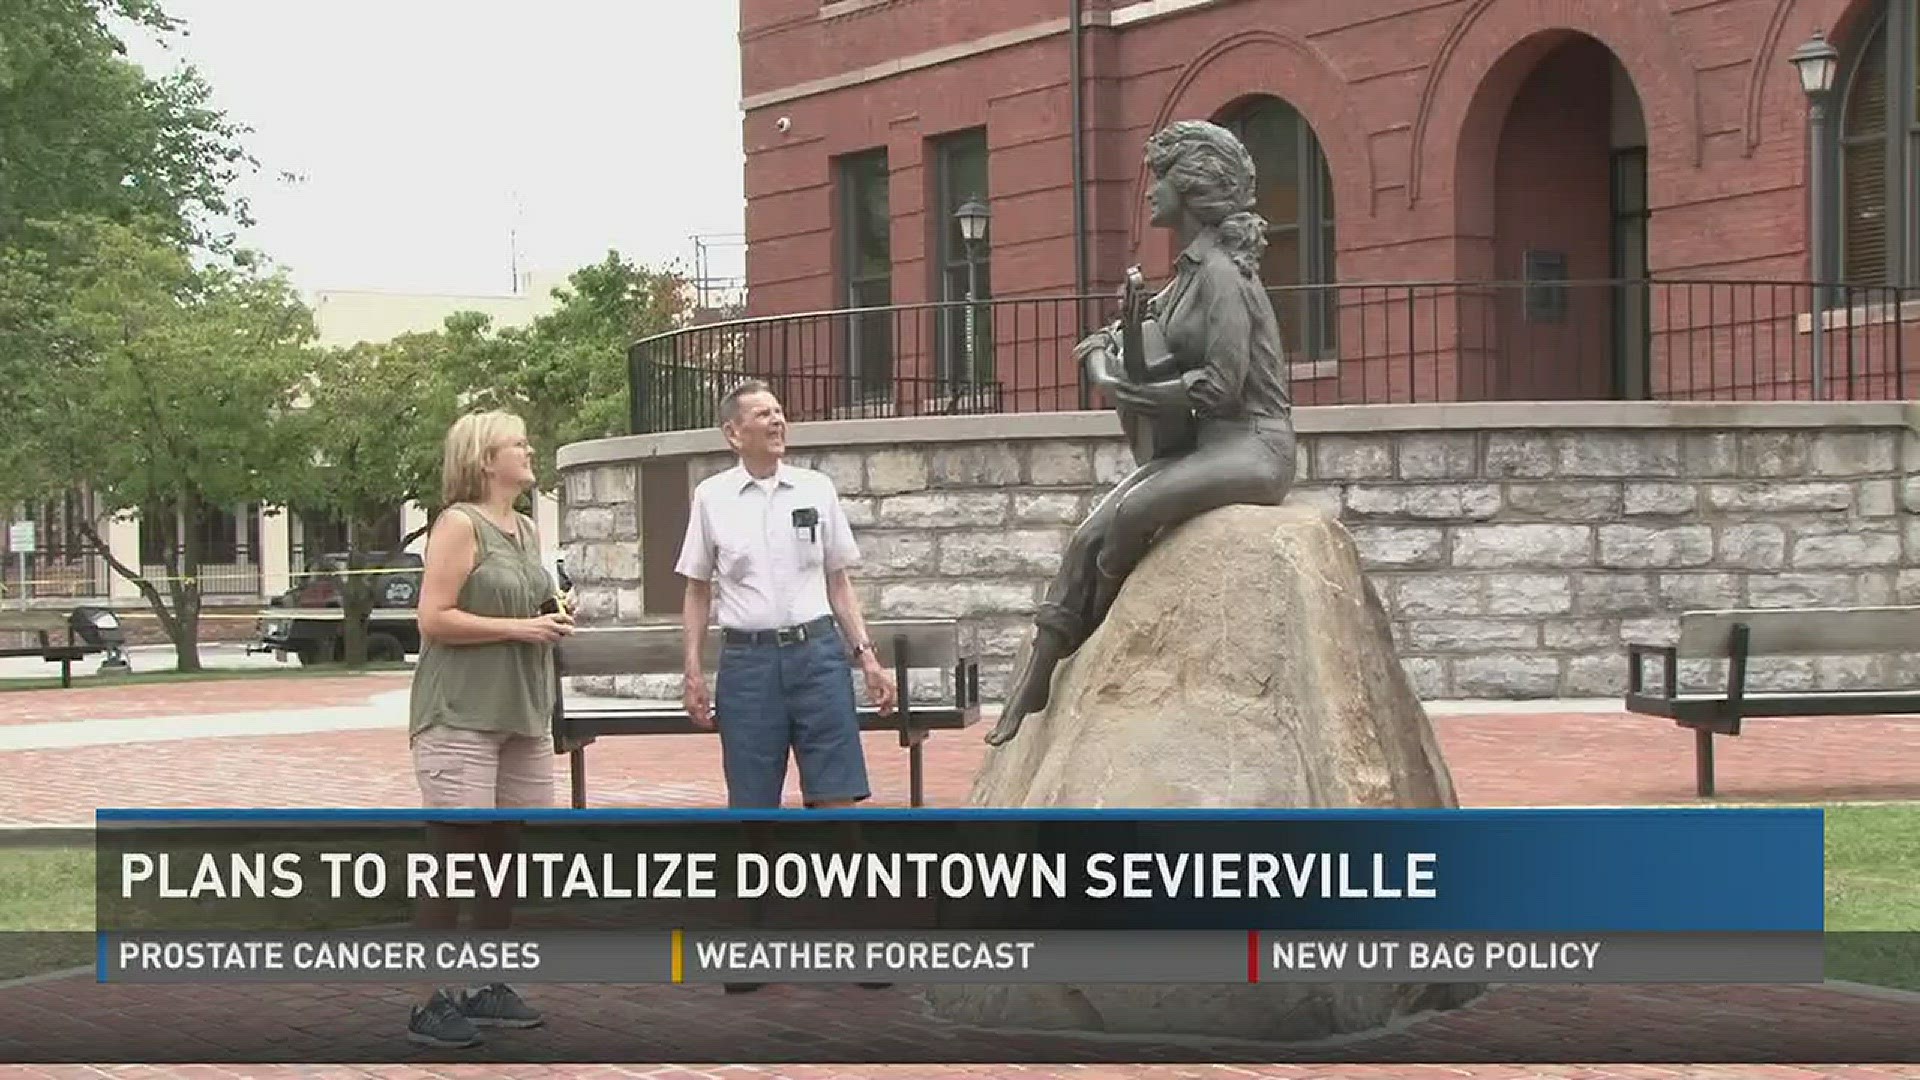 The city is trying to revitalize its downtown area.